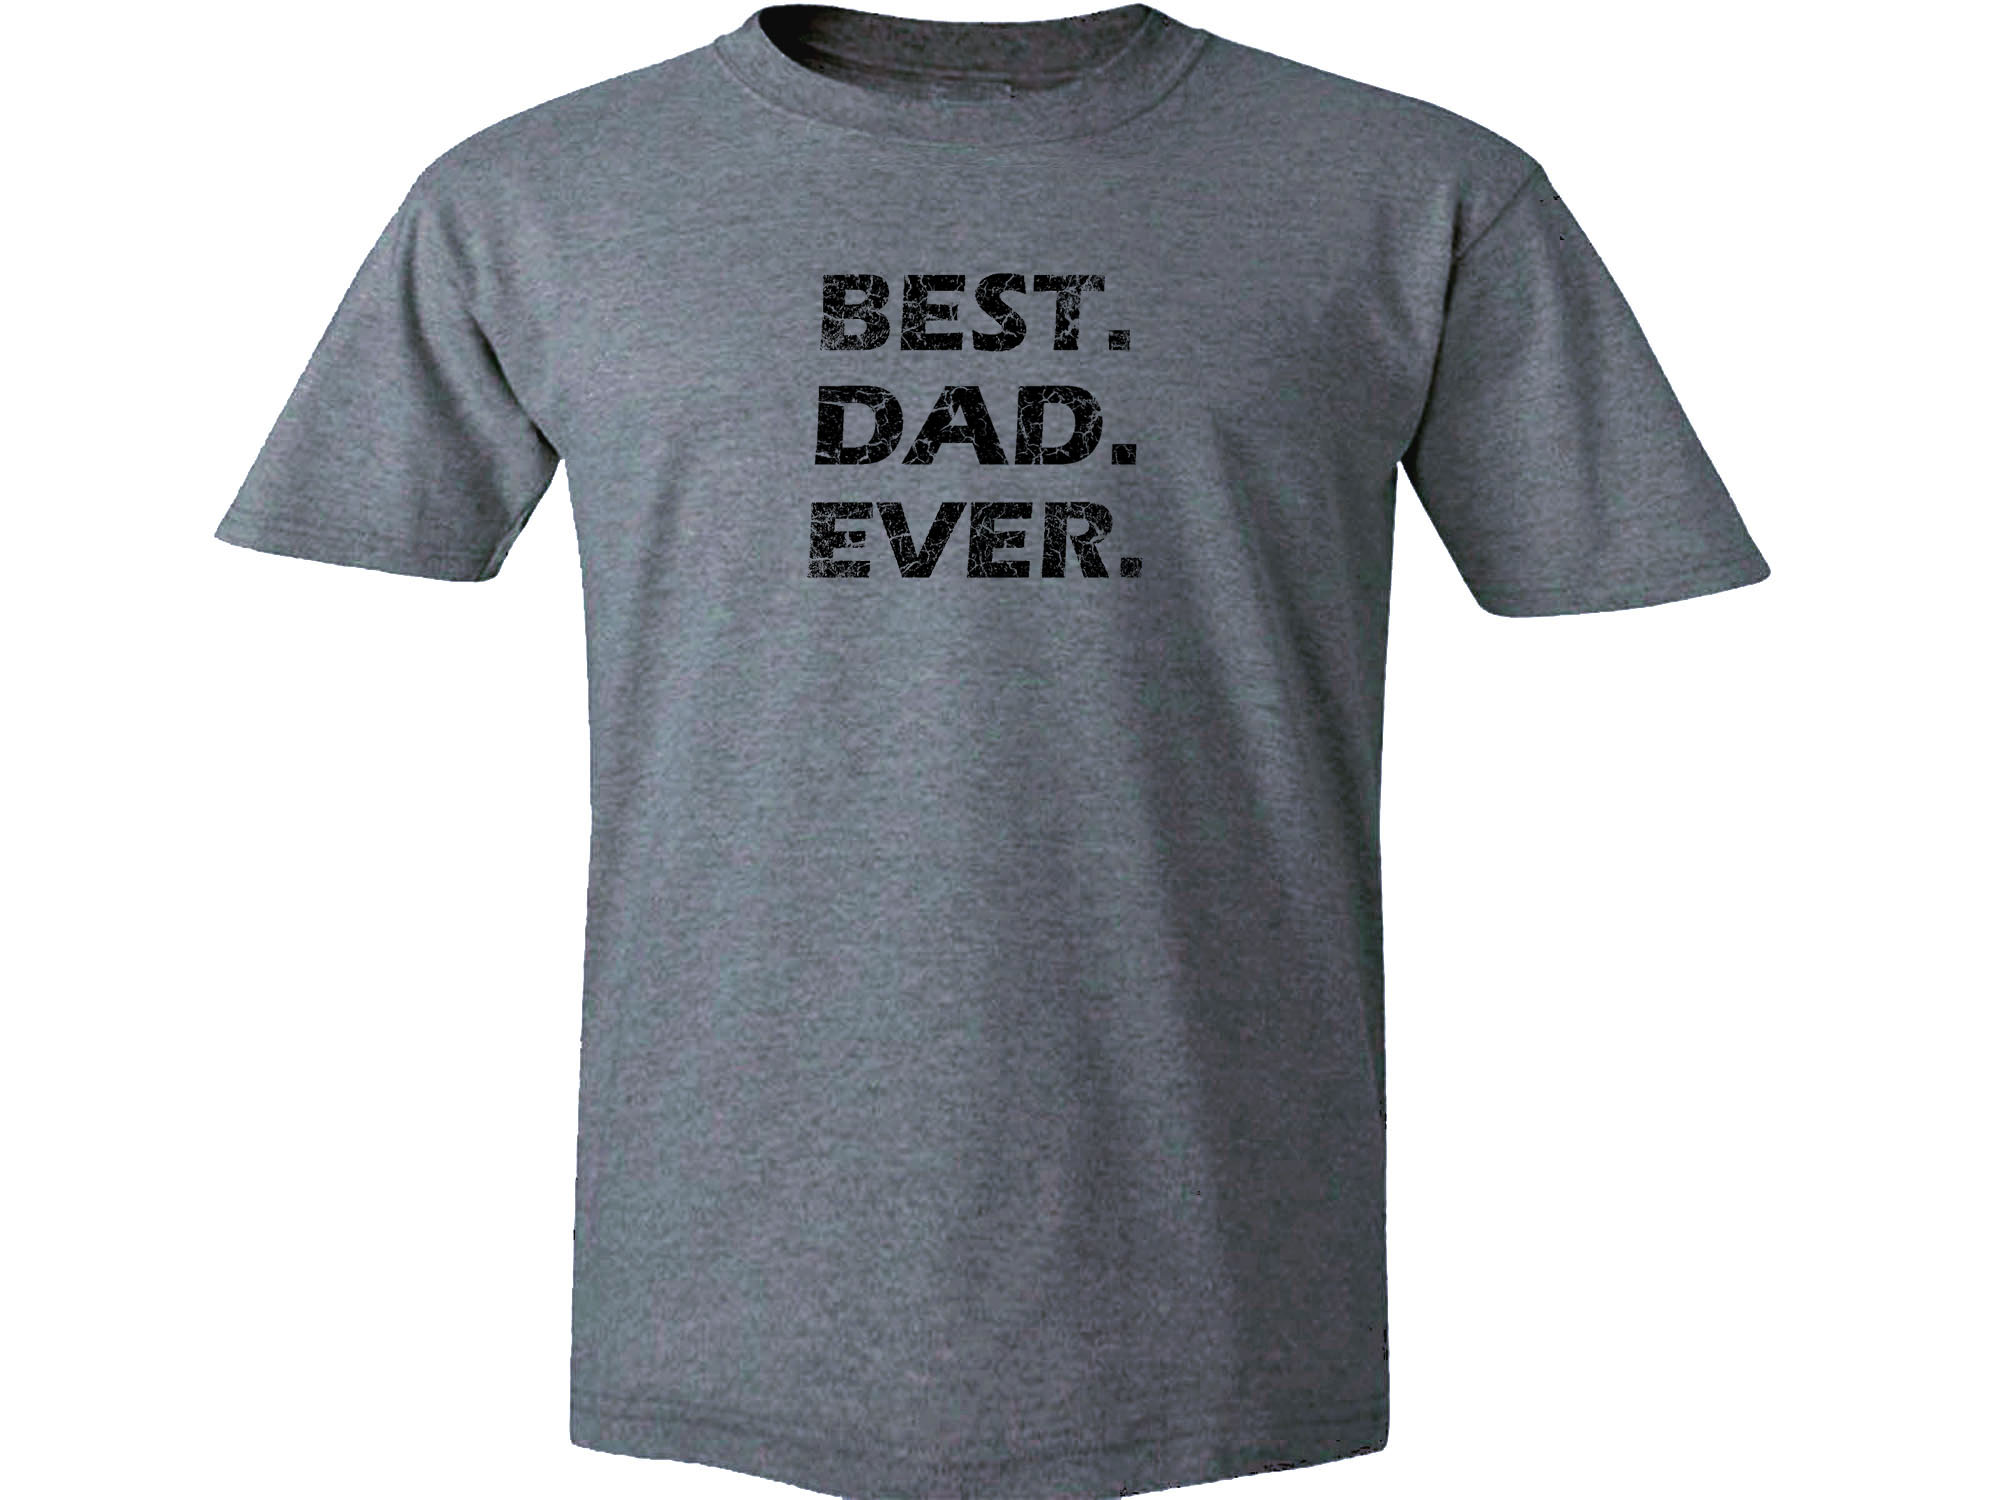 Best dad ever distressed print t-shirt